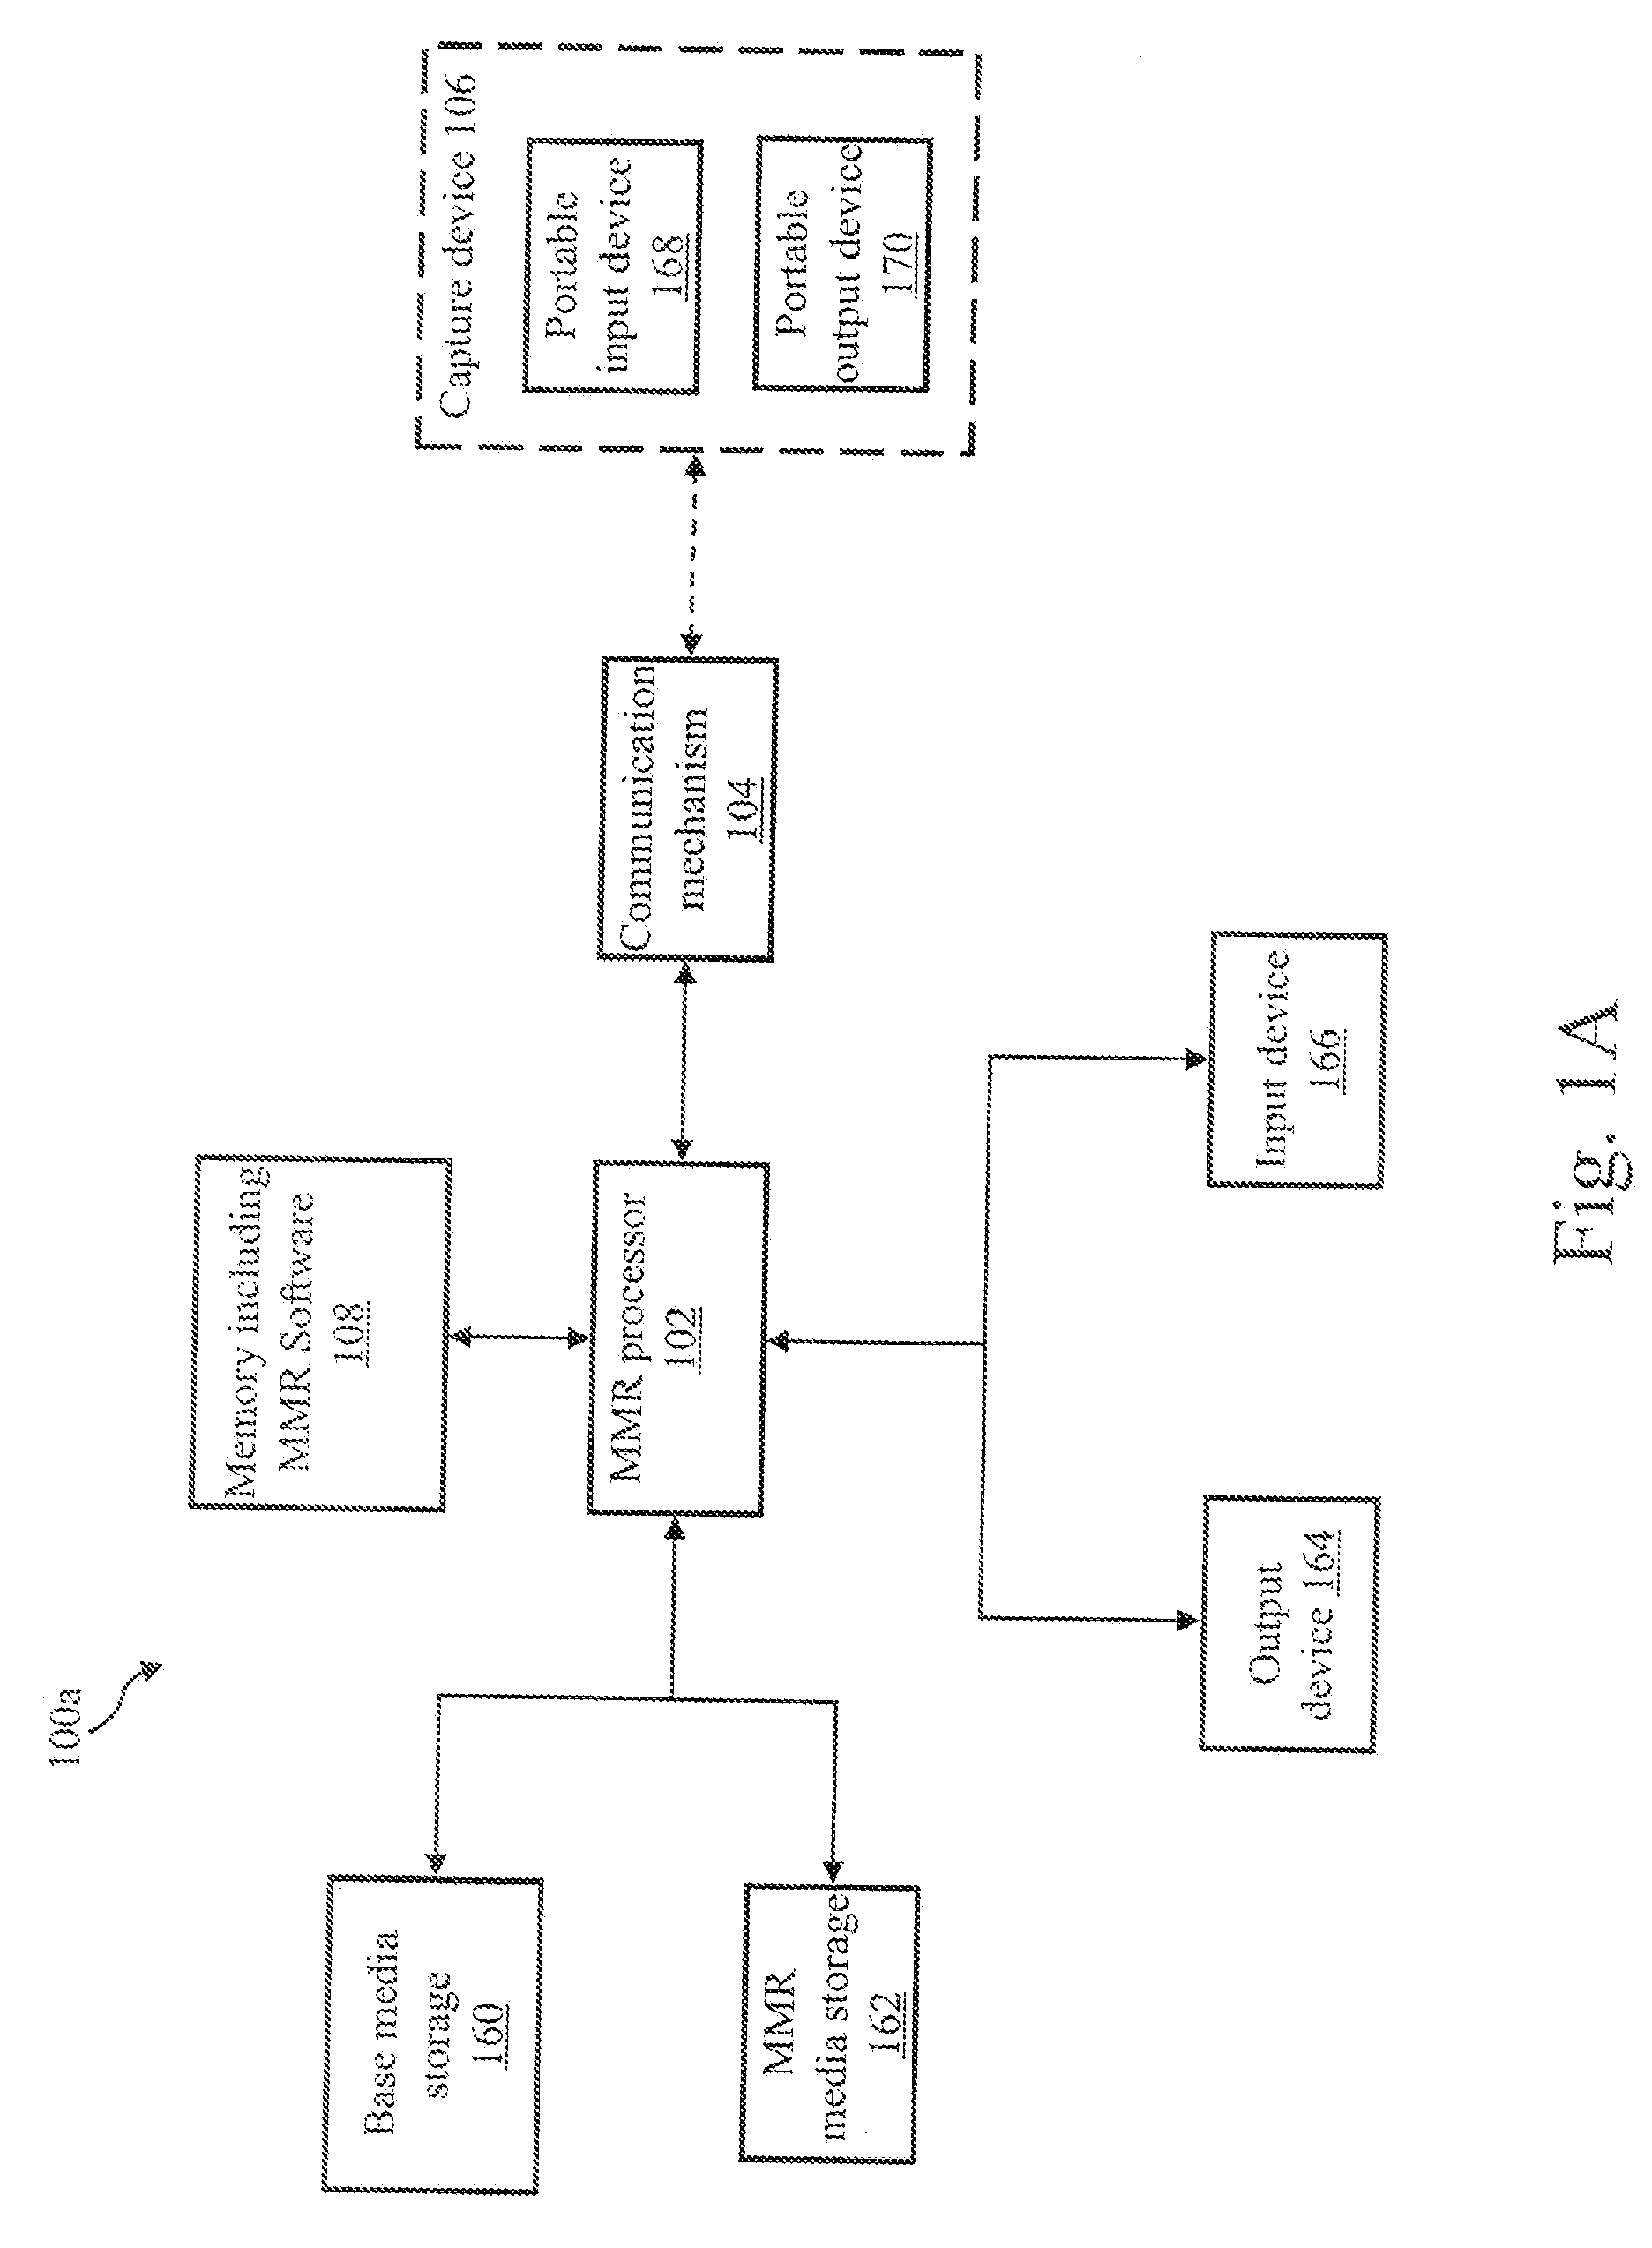 Method And System For Position-Based Image Matching In A Mixed Media Environment